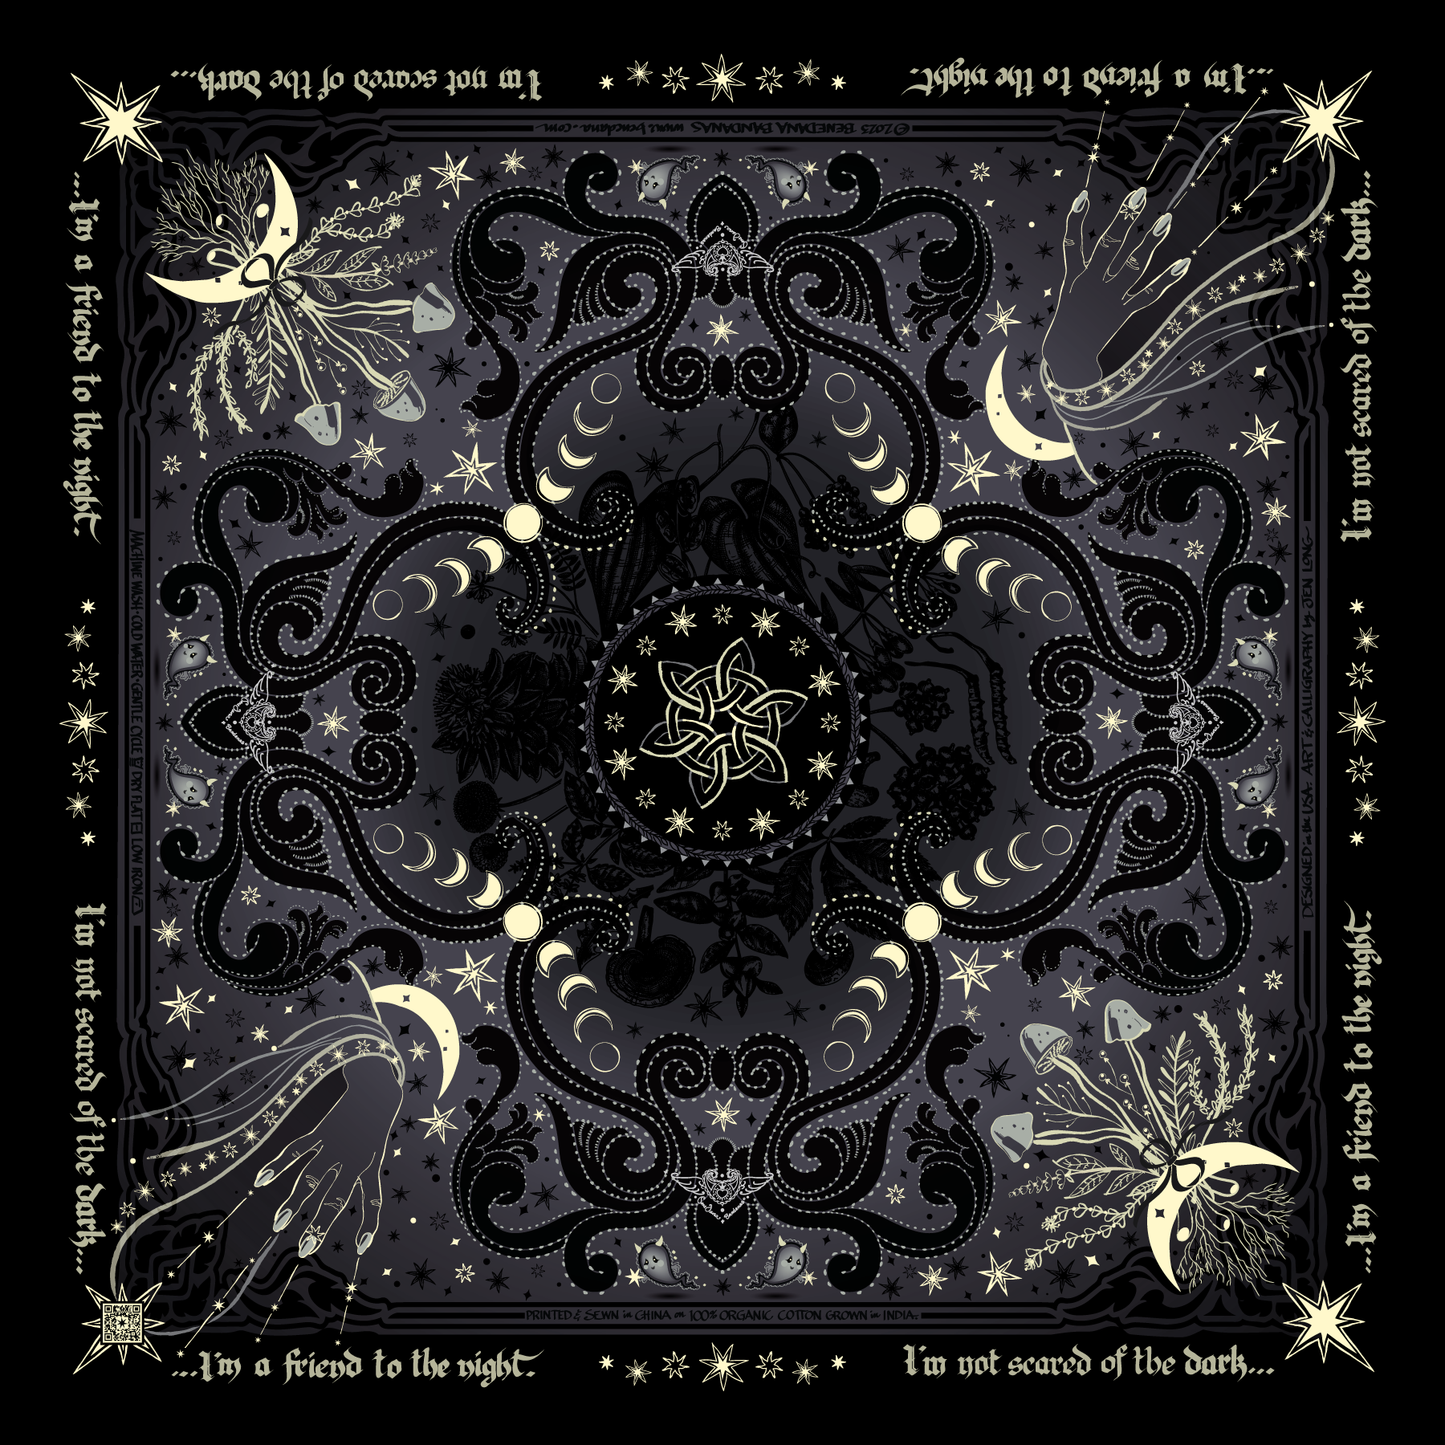 NEW! Spooky Bandana featuring the music of Allysen Callery